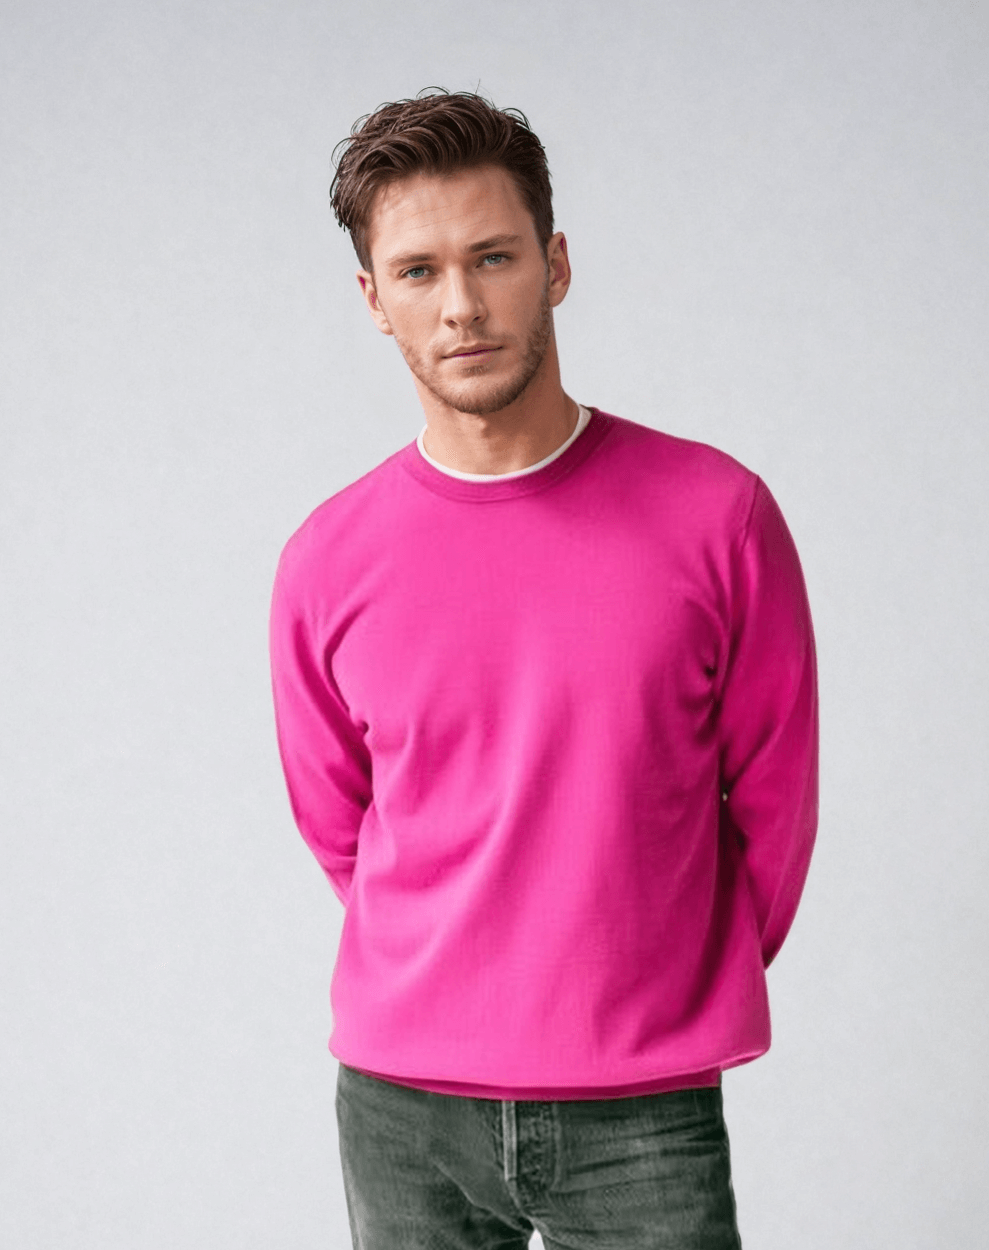 CALEB | Long Sleeve Crew-Neck Sweater | COLOR: MAGENTA |3D Knitted by ALLTRUEIST